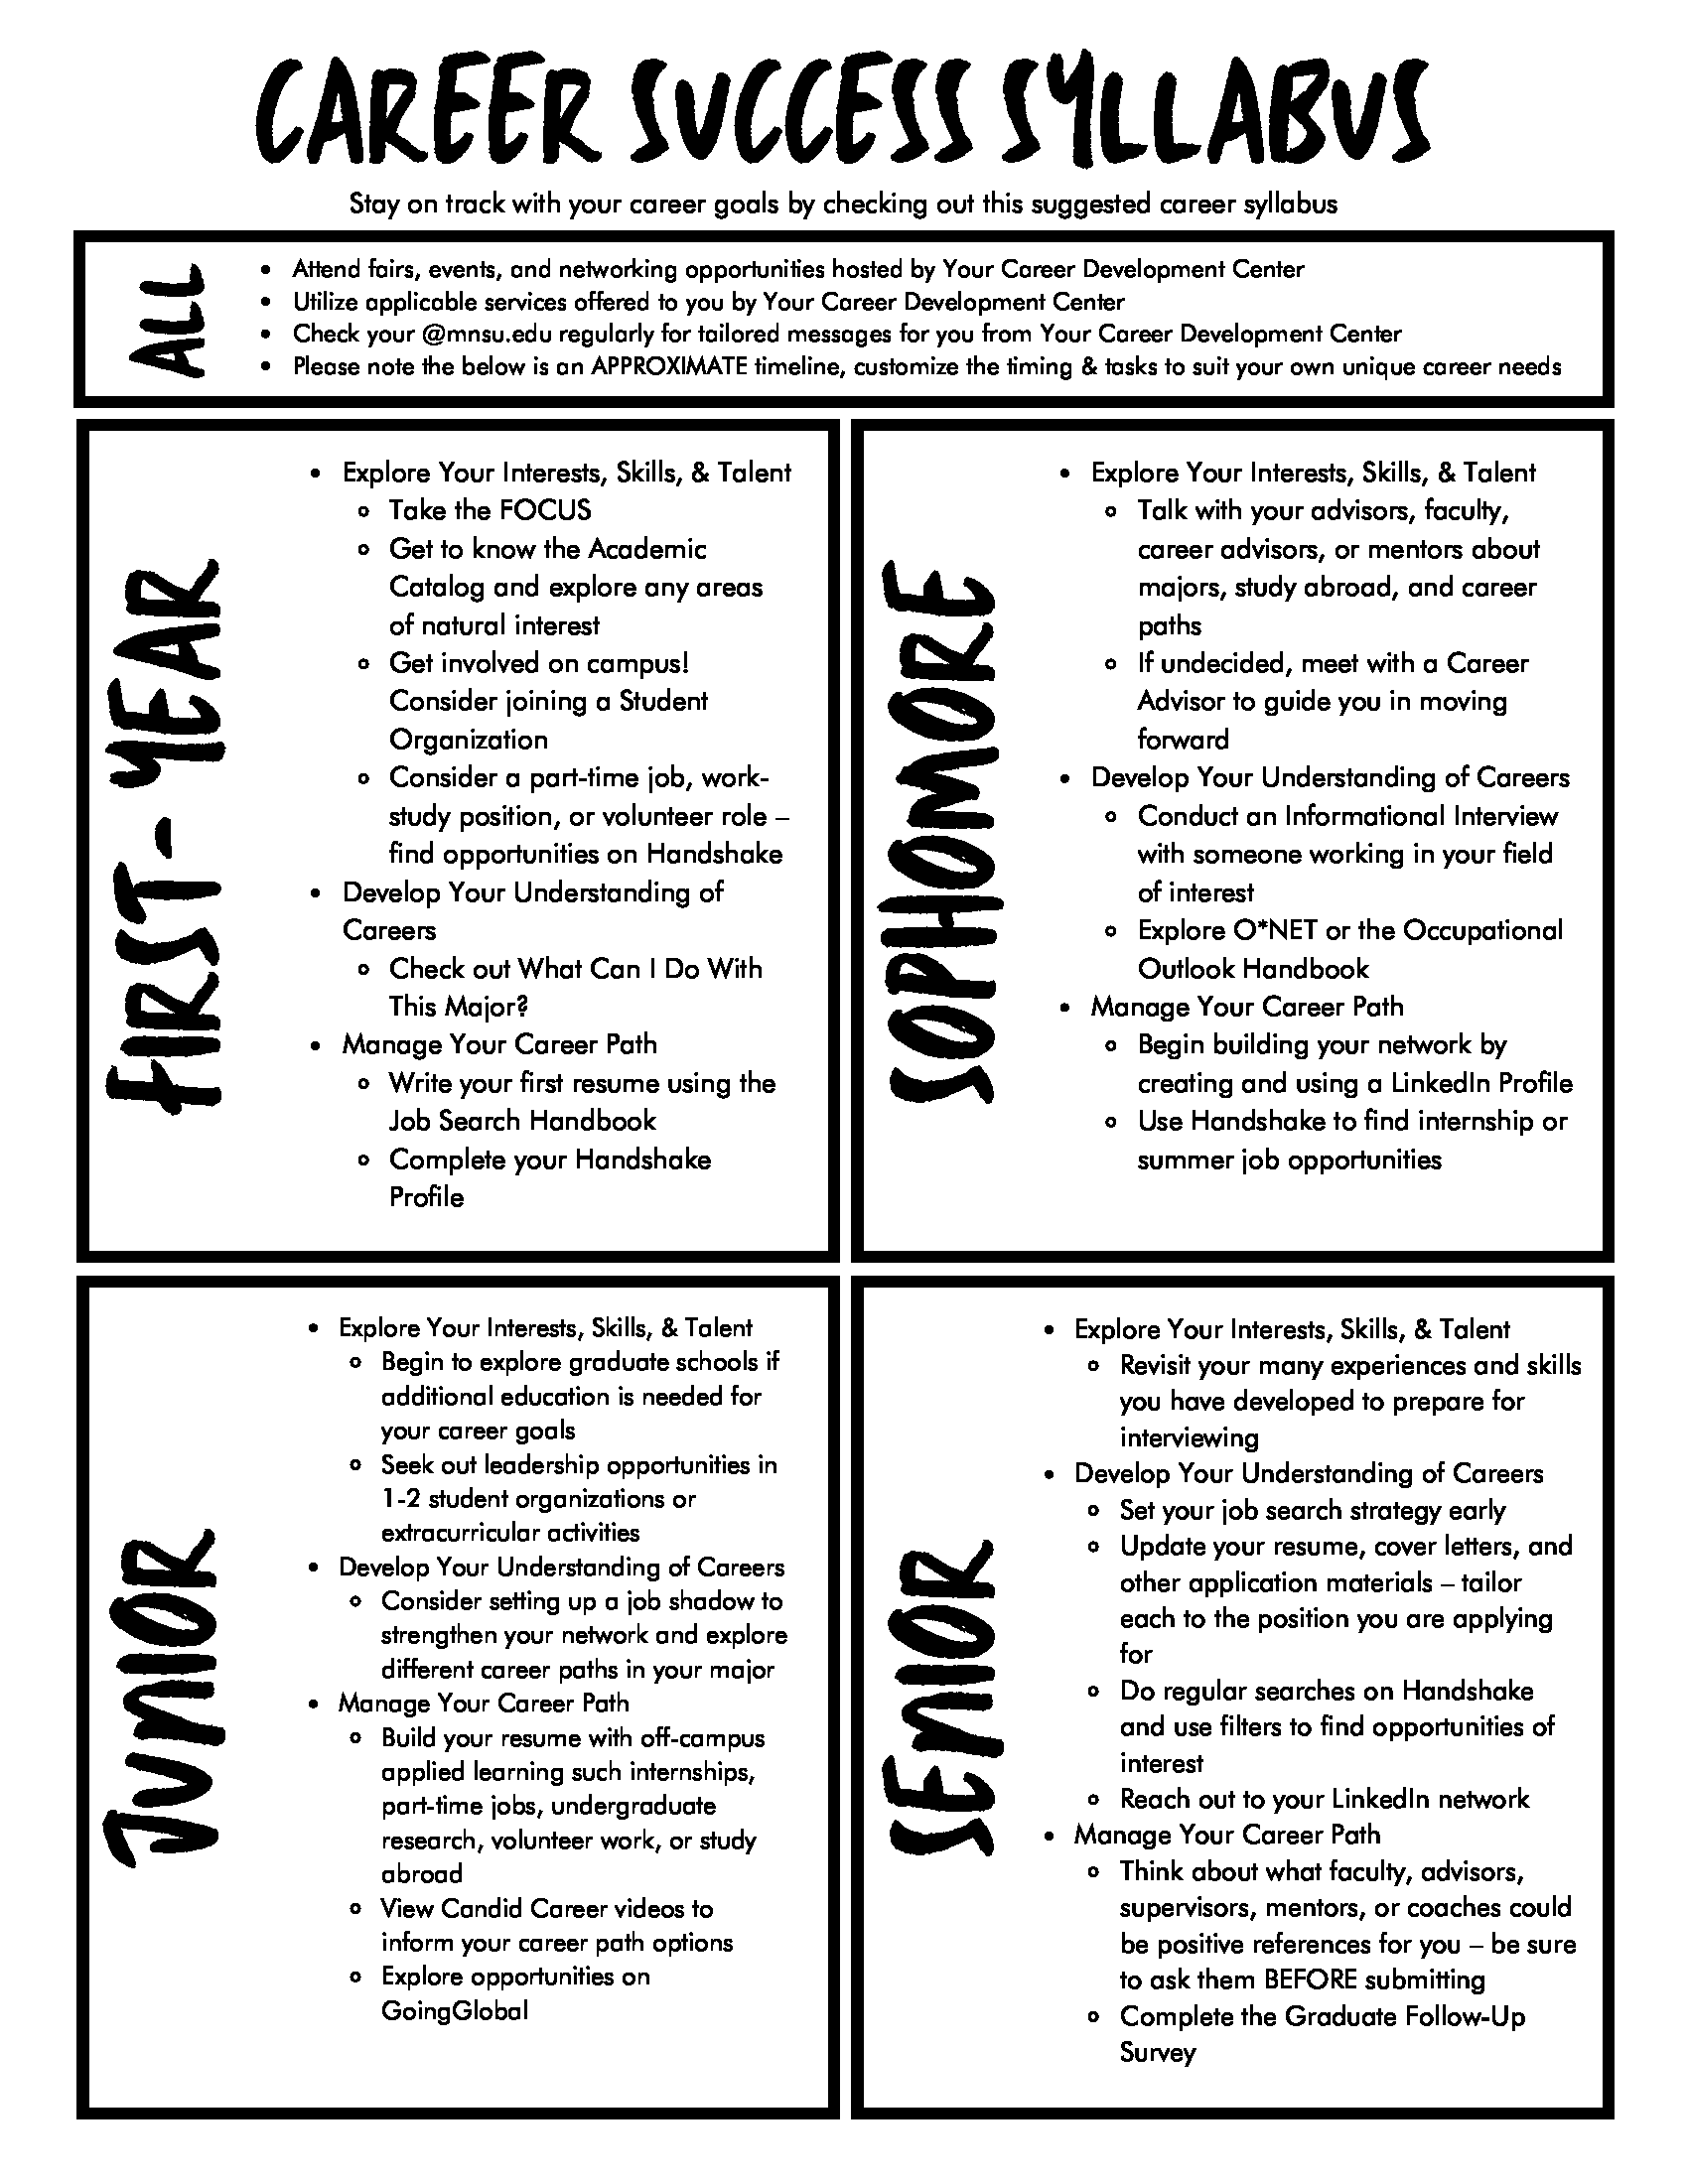 Career Success Syllabus from First-Year to Senior year